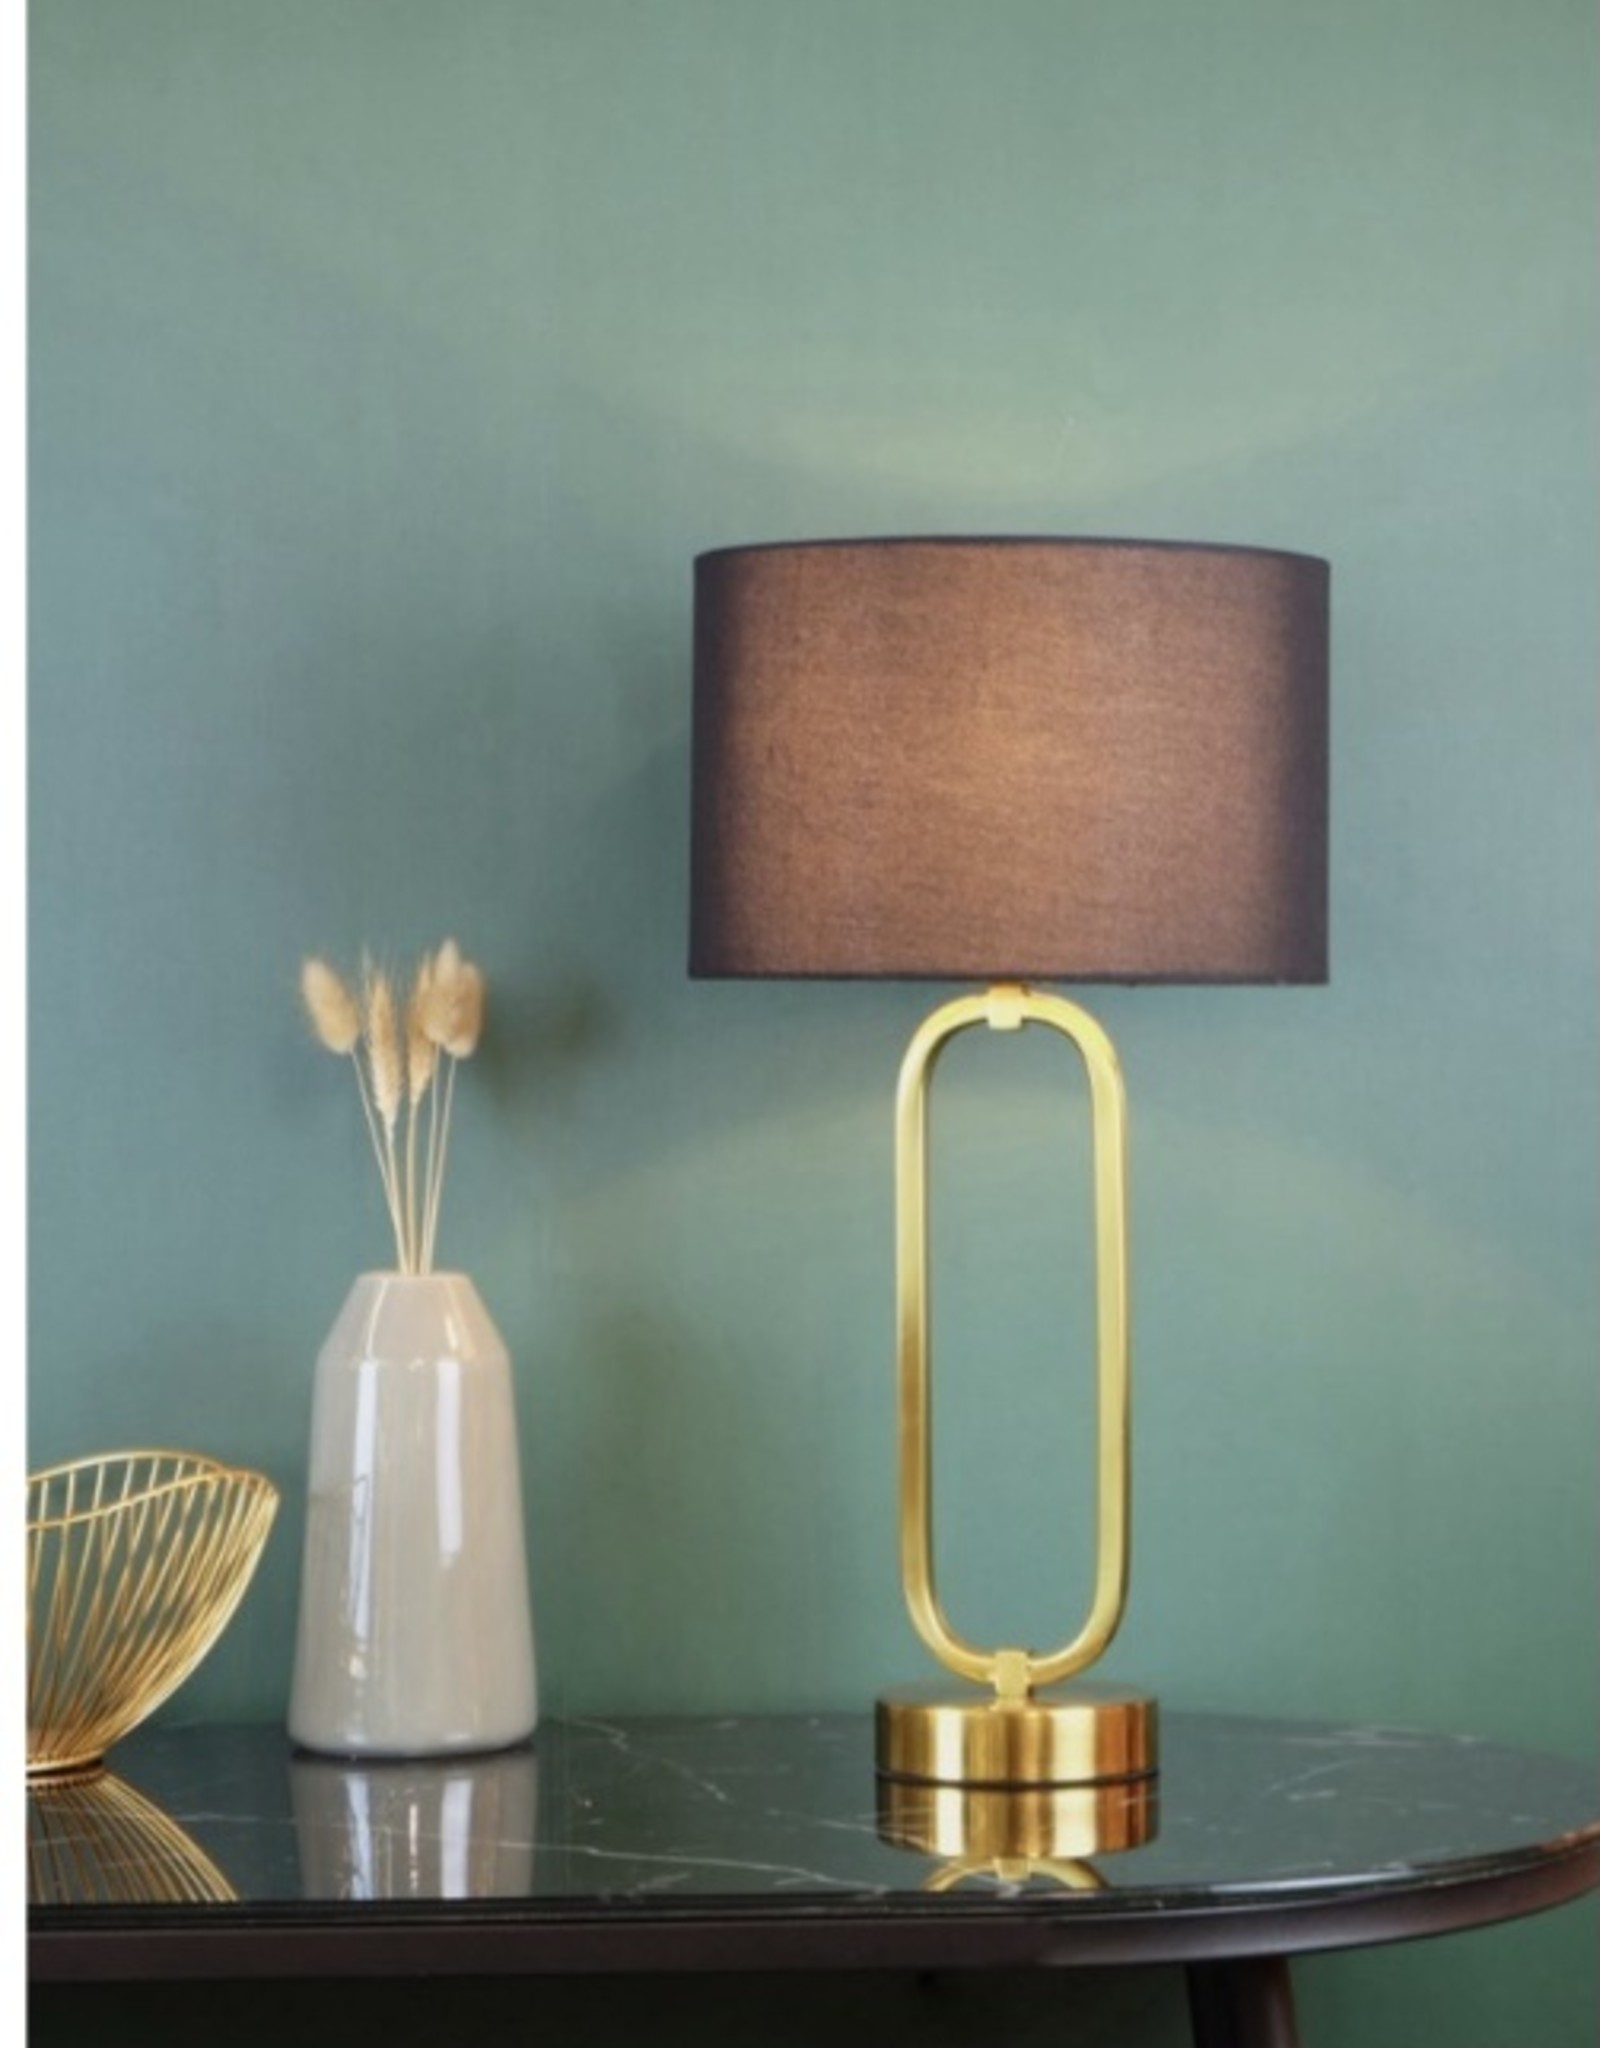 Lamp CJ Oval Ring in Gold Metal Table L. with Black Shade  LM397600